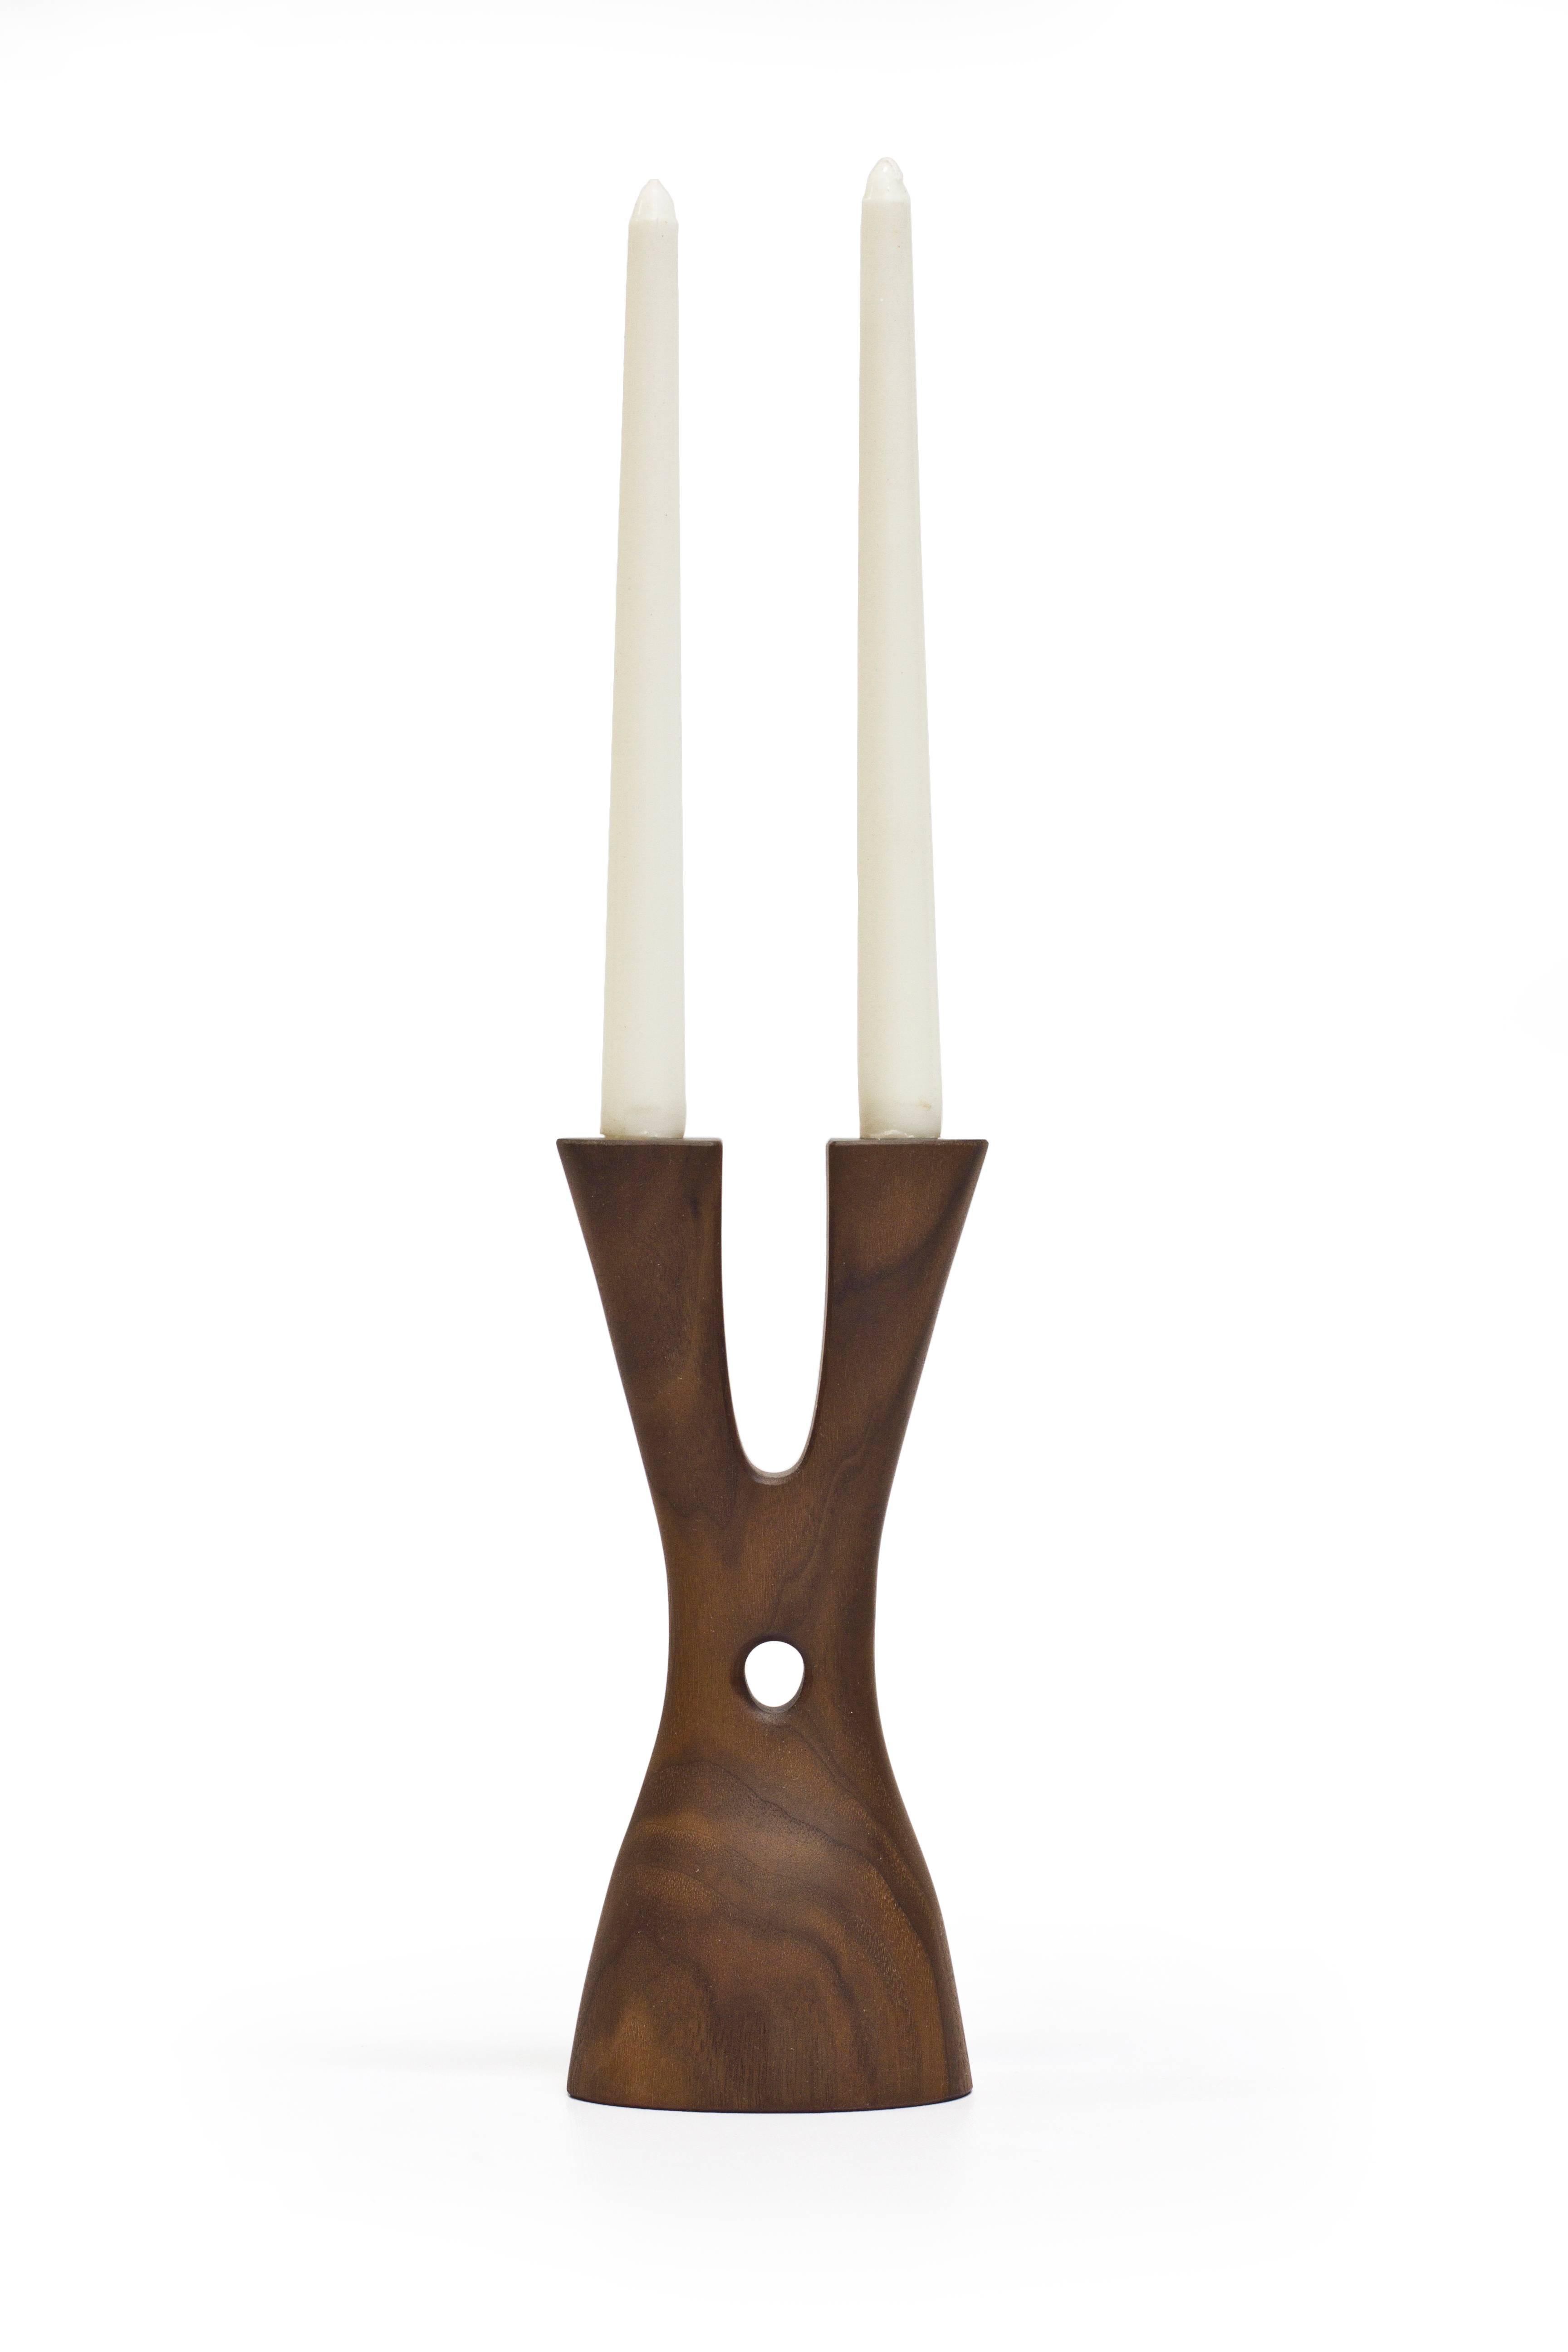 The Mastodon by Noah Norton for Wooda powerfully lifts and holds two tapers. Inspired by the natural world and crafted in beautiful walnut, ash, and oak, Mastodon is designed to brighten a room and encourage conversation.

About the designer: Noah